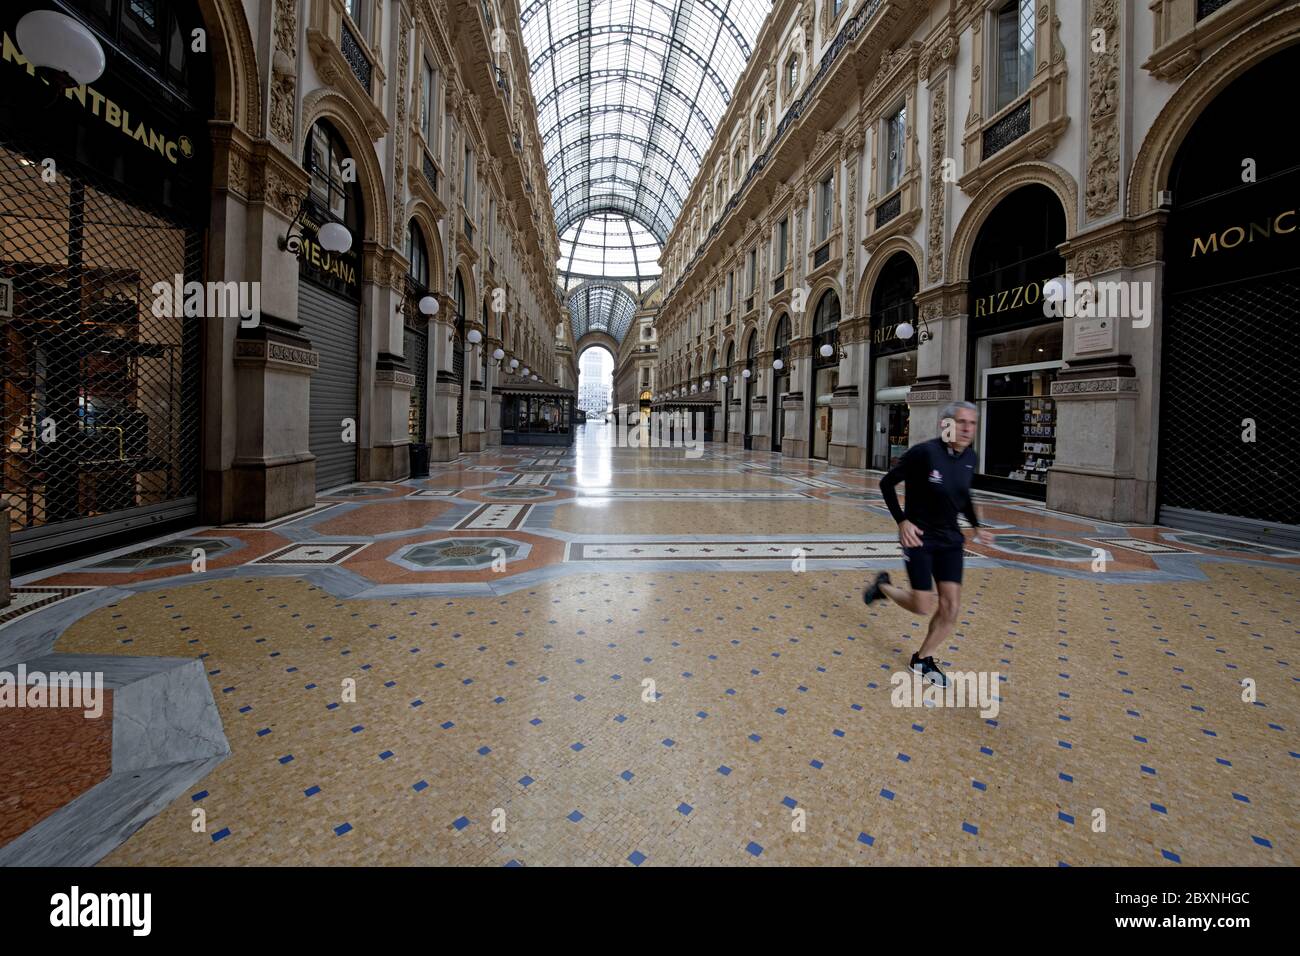 A man jogging in the emptiness of Galleria Vittorio Emanuele with shops closed during the lockdown caused by the Covid-19 in Milan, Italy. Stock Photo